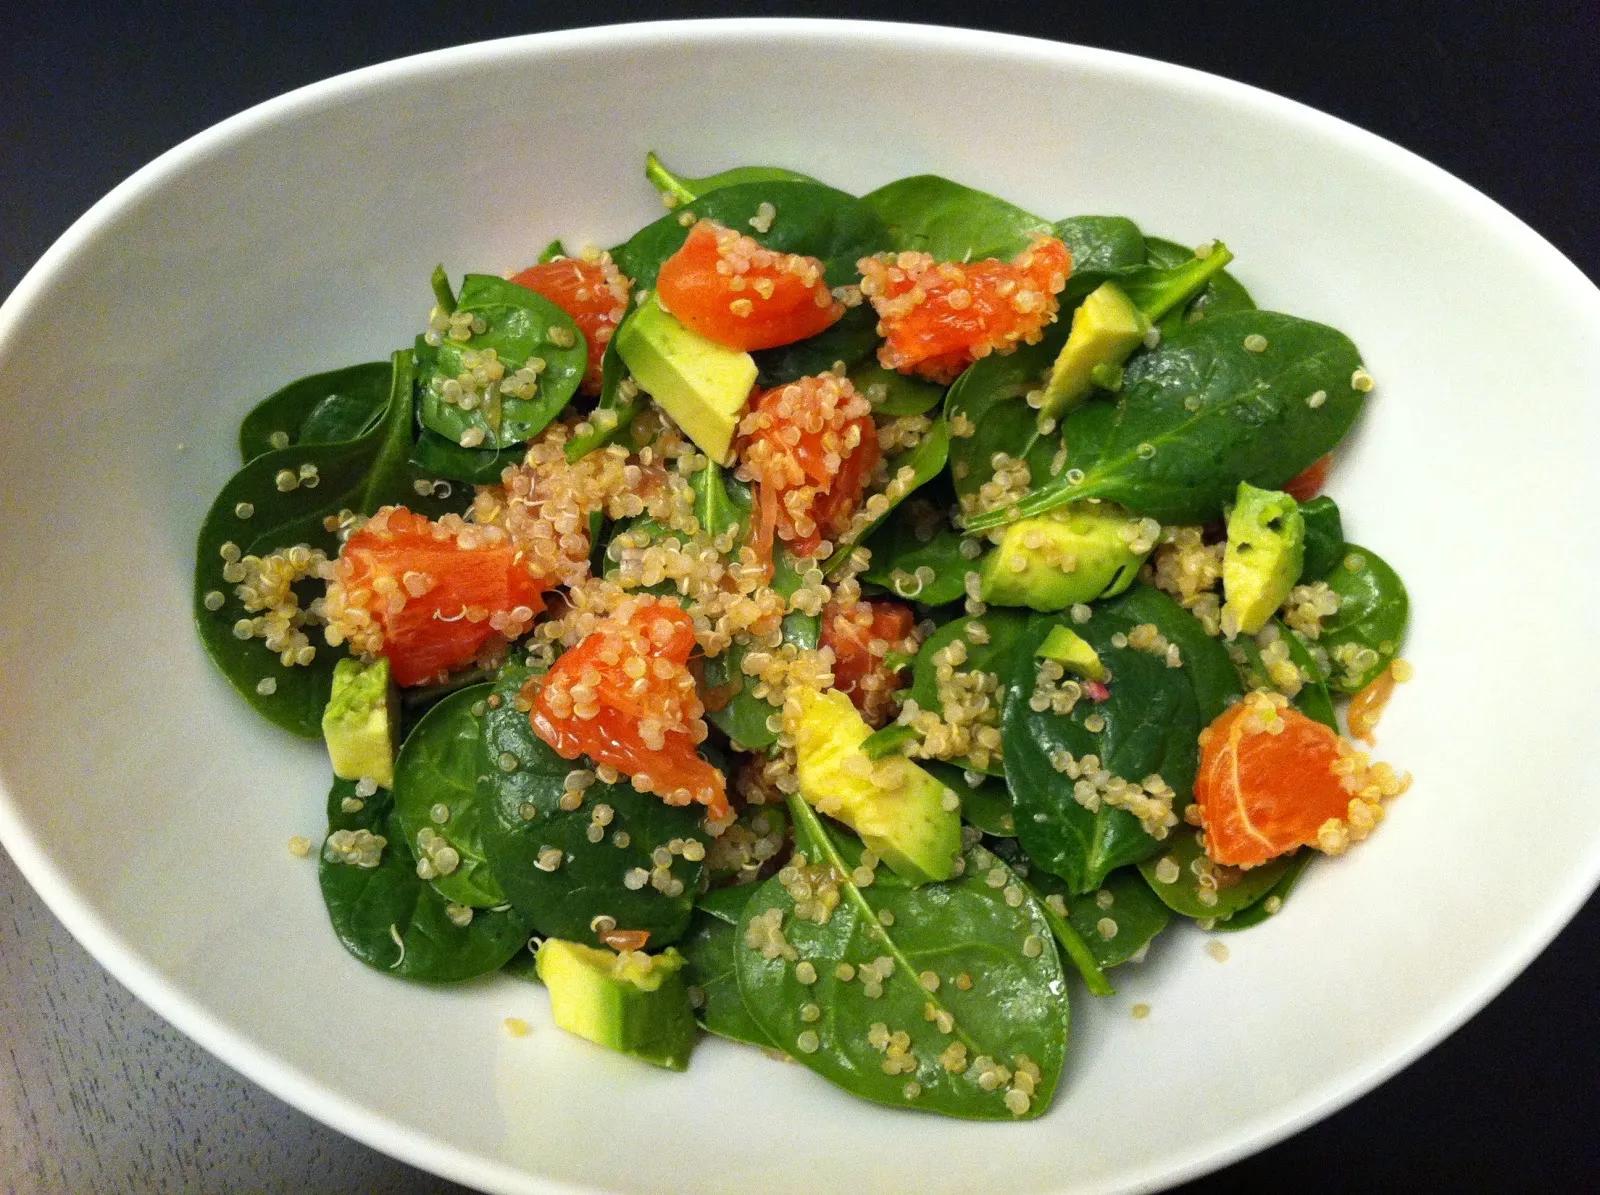 Playing With My Food!: Spinach Quinoa Salad with Grapefruit and Avocado